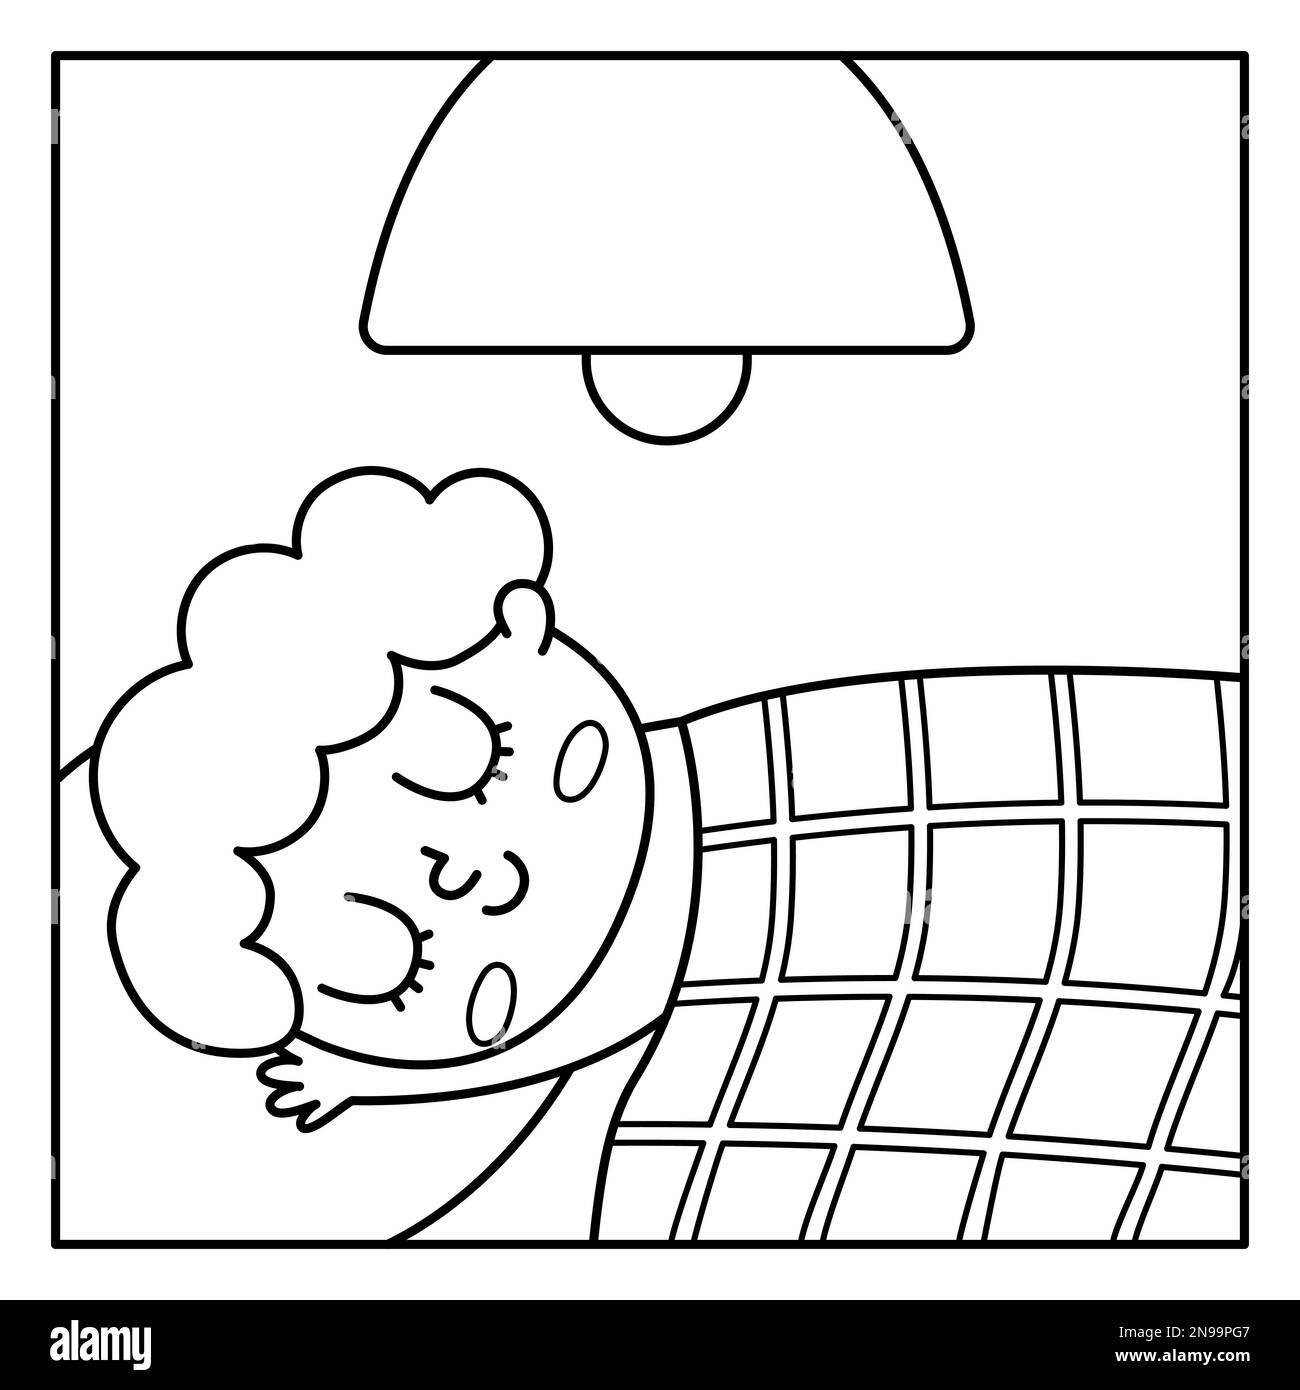 Black and white sleeping boy icon. Cute line napping kid. Child doing daily routine. Night ritual or healthy lifestyle concept or coloring page Stock Vector